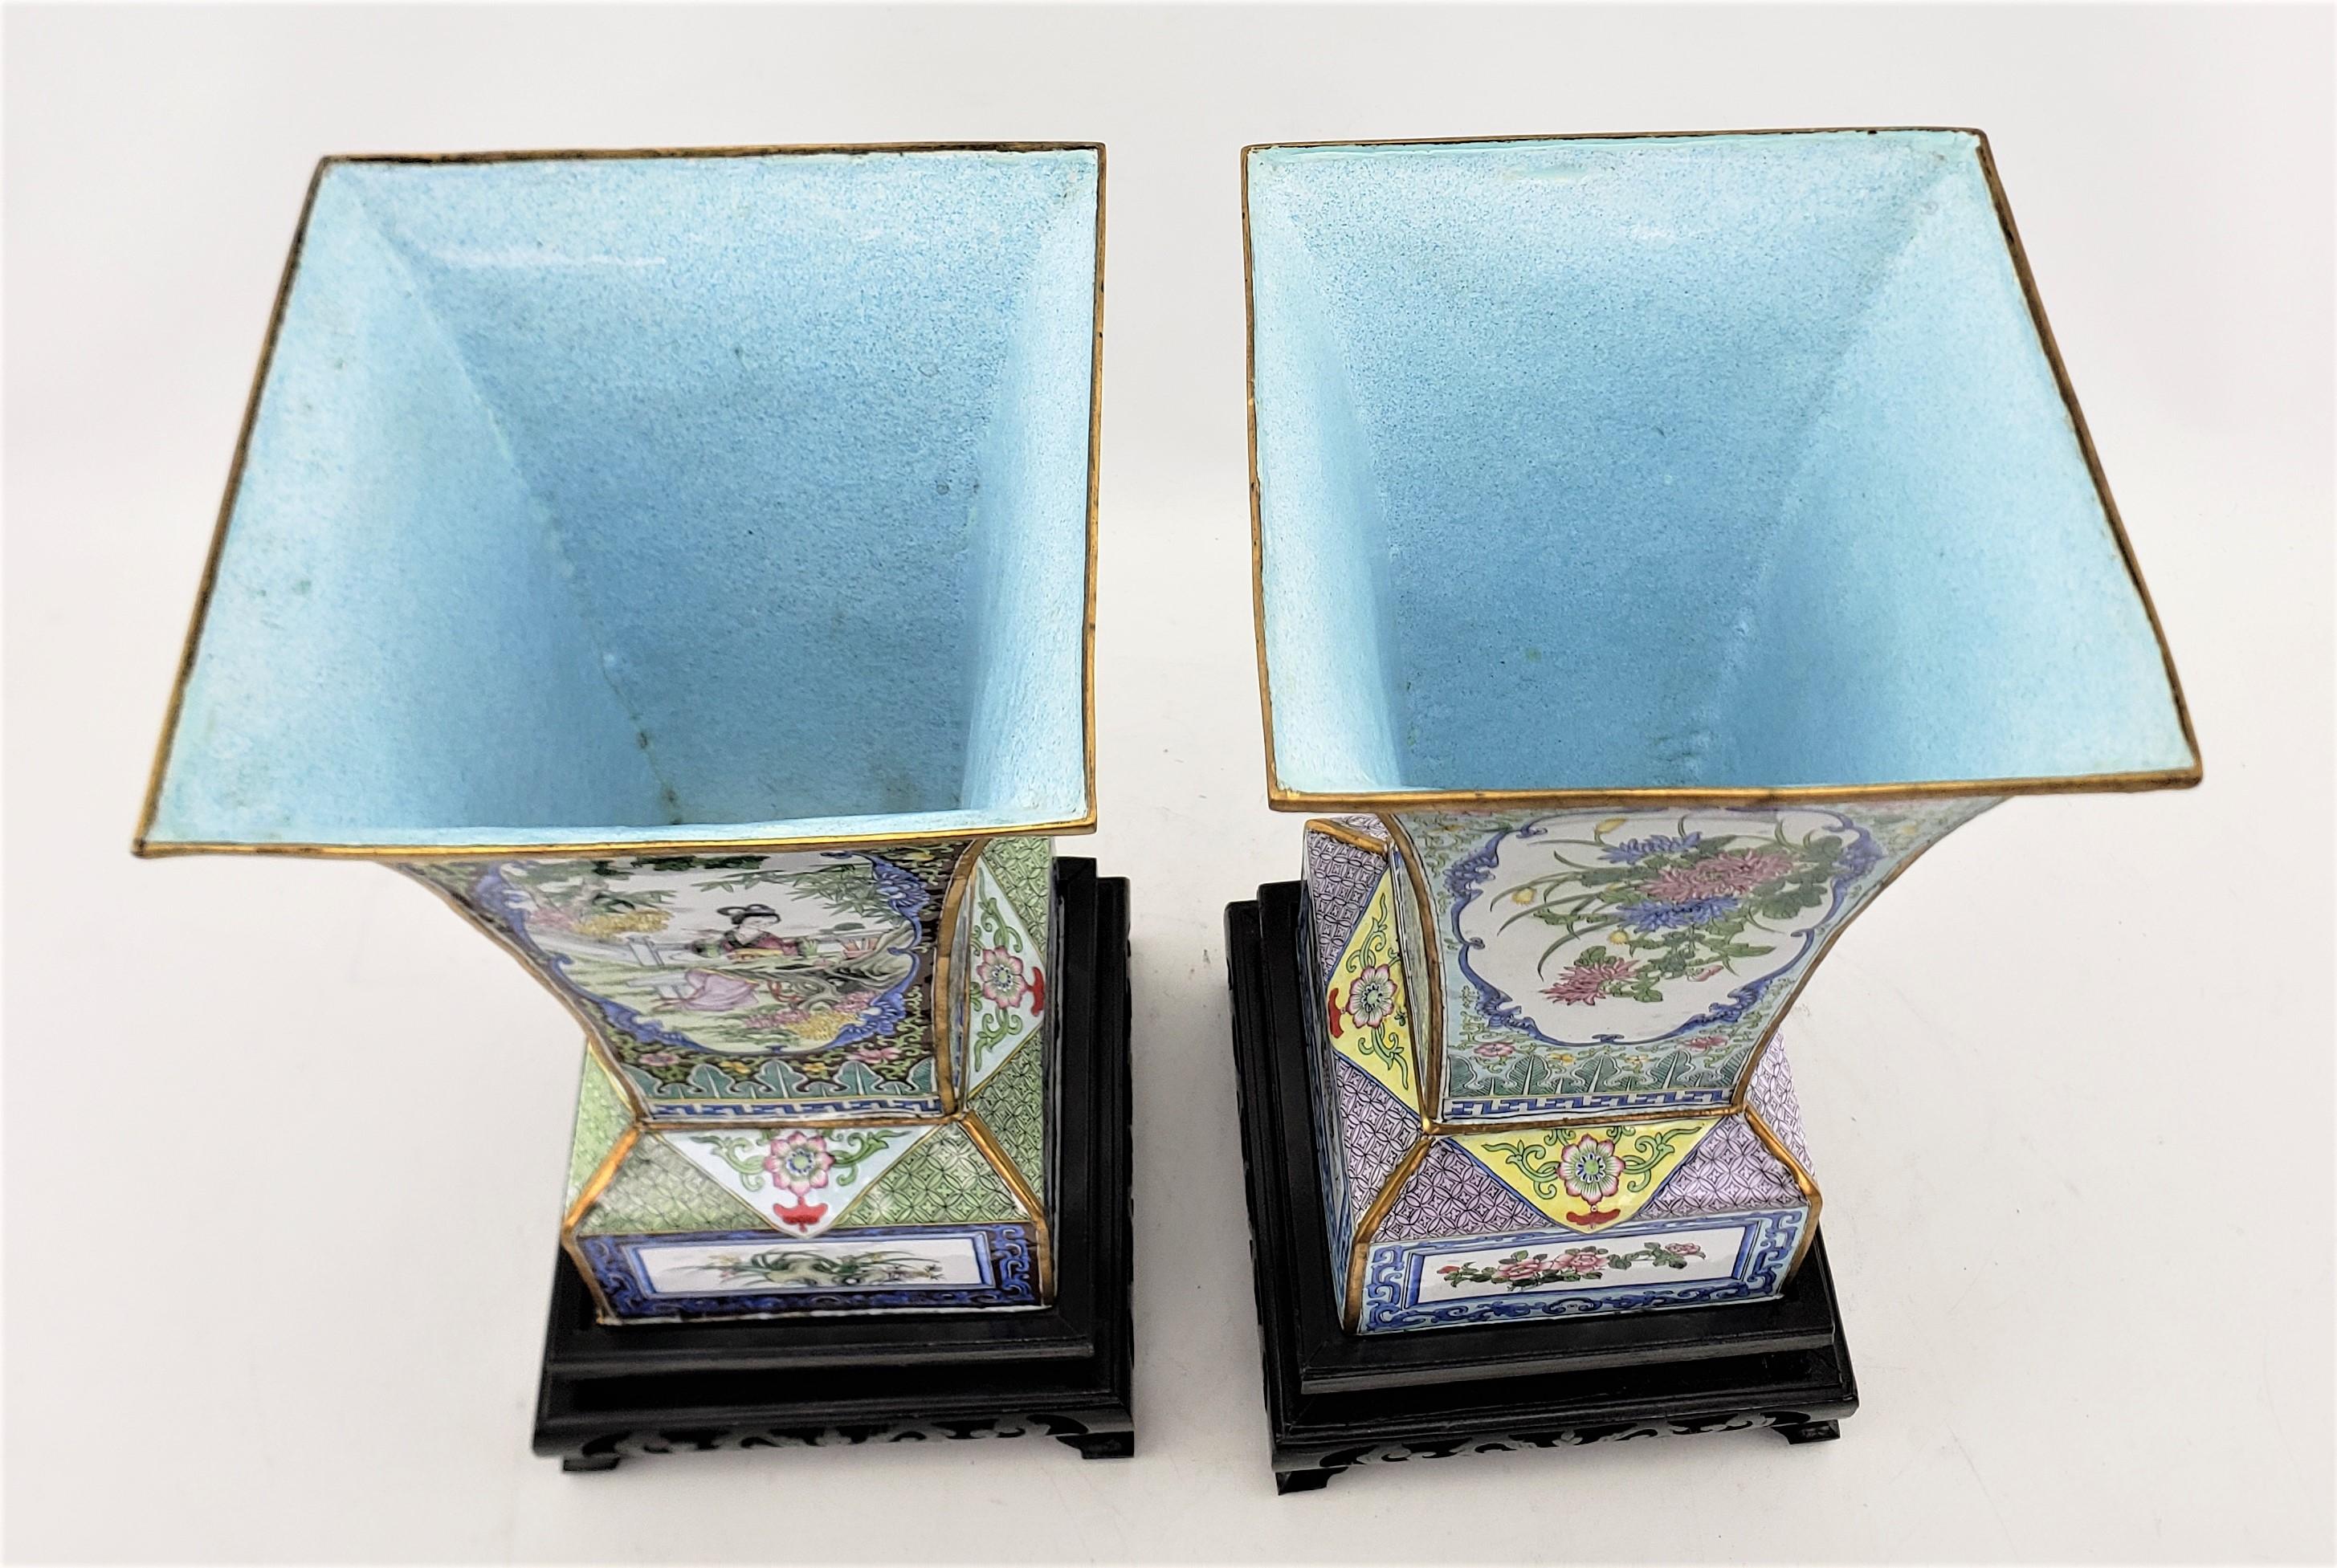 Pair of Mid 20th Century Enameled Copper Vases with Floral & Geisha Decoration For Sale 9